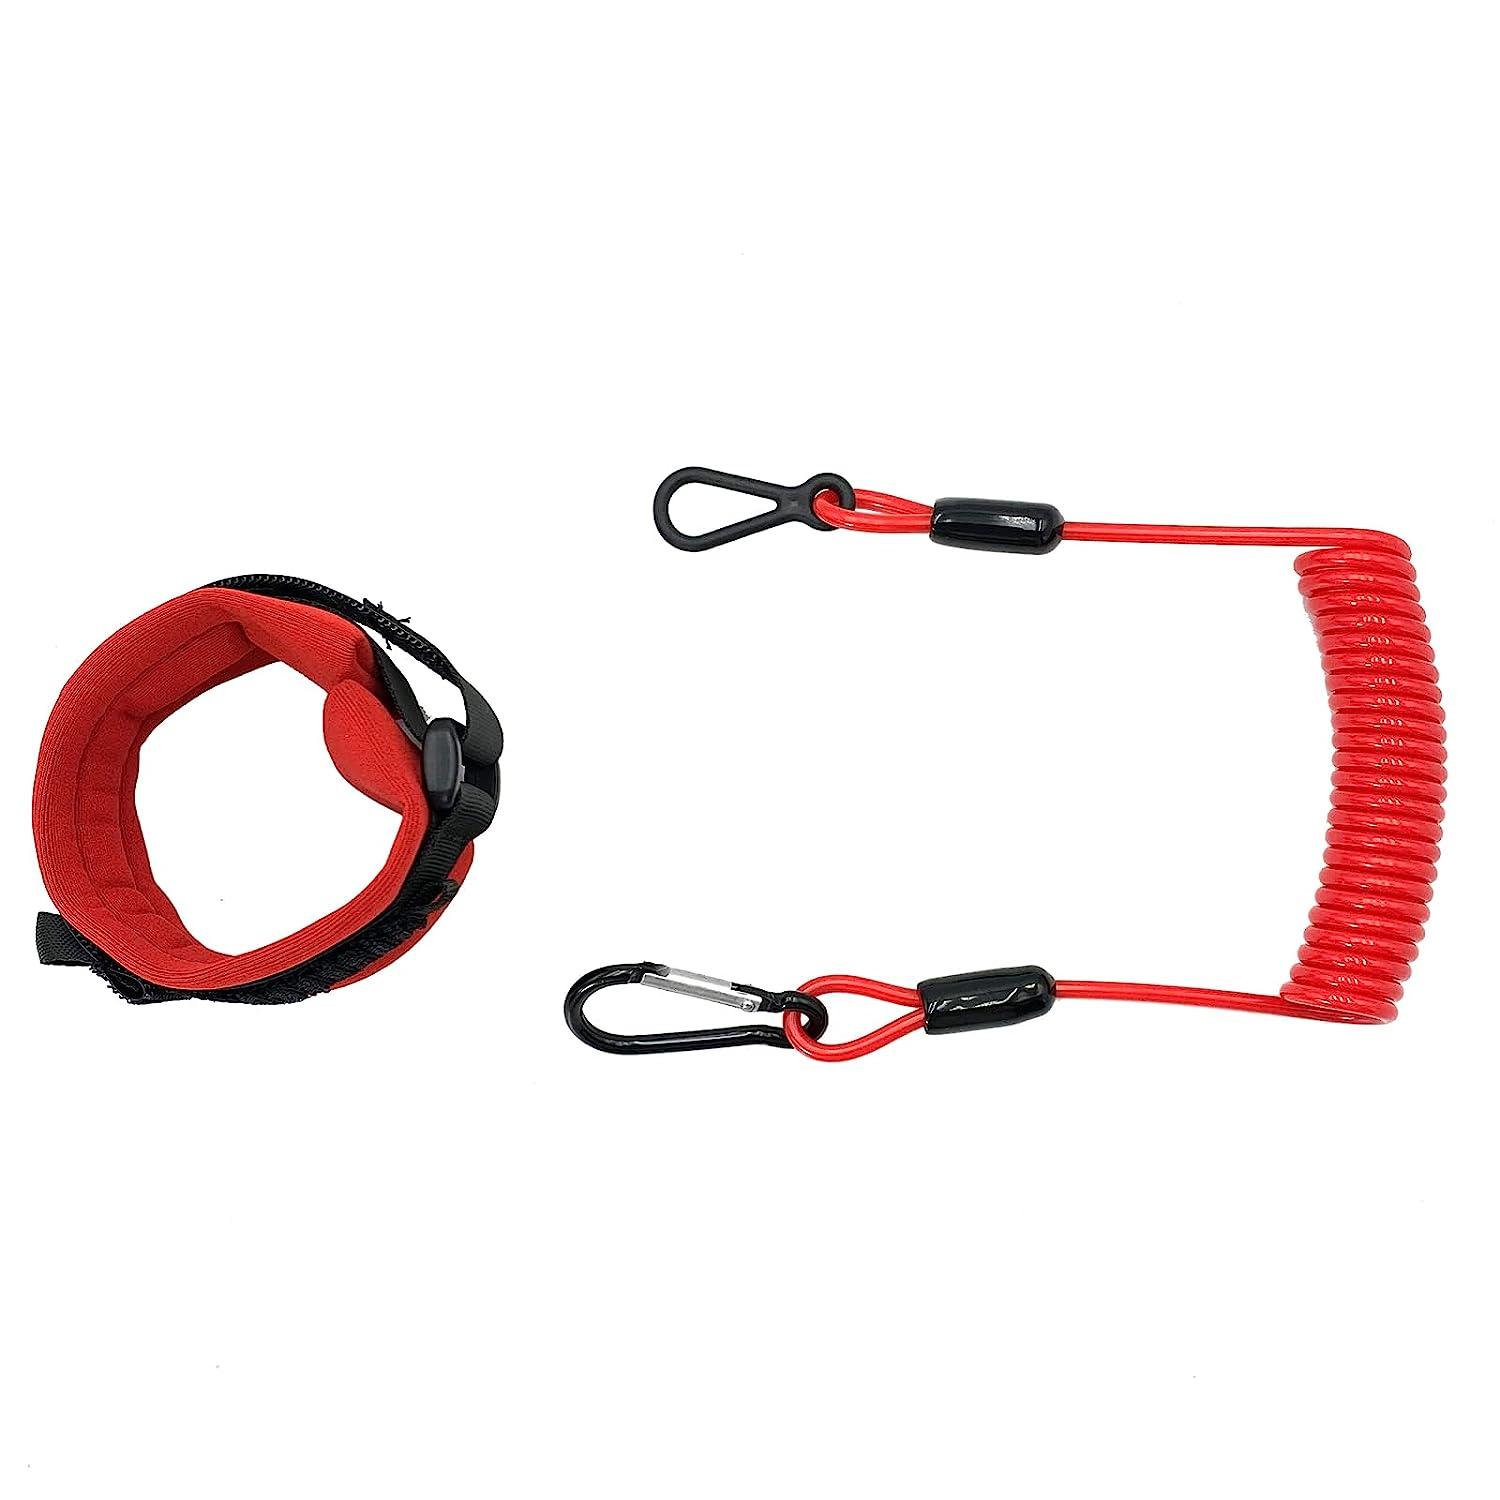 8M0092849 Boat Engine Emergency Stop Switch Safety Lanyard Cord Replacement  for Mercury Mercruiser Outboard Motor - Replace 15920T54 15920A54 15920Q54,  60 Inch/150 cm Long (with Wrist Strap) Kill Switch Lanyard with Wrist Strap